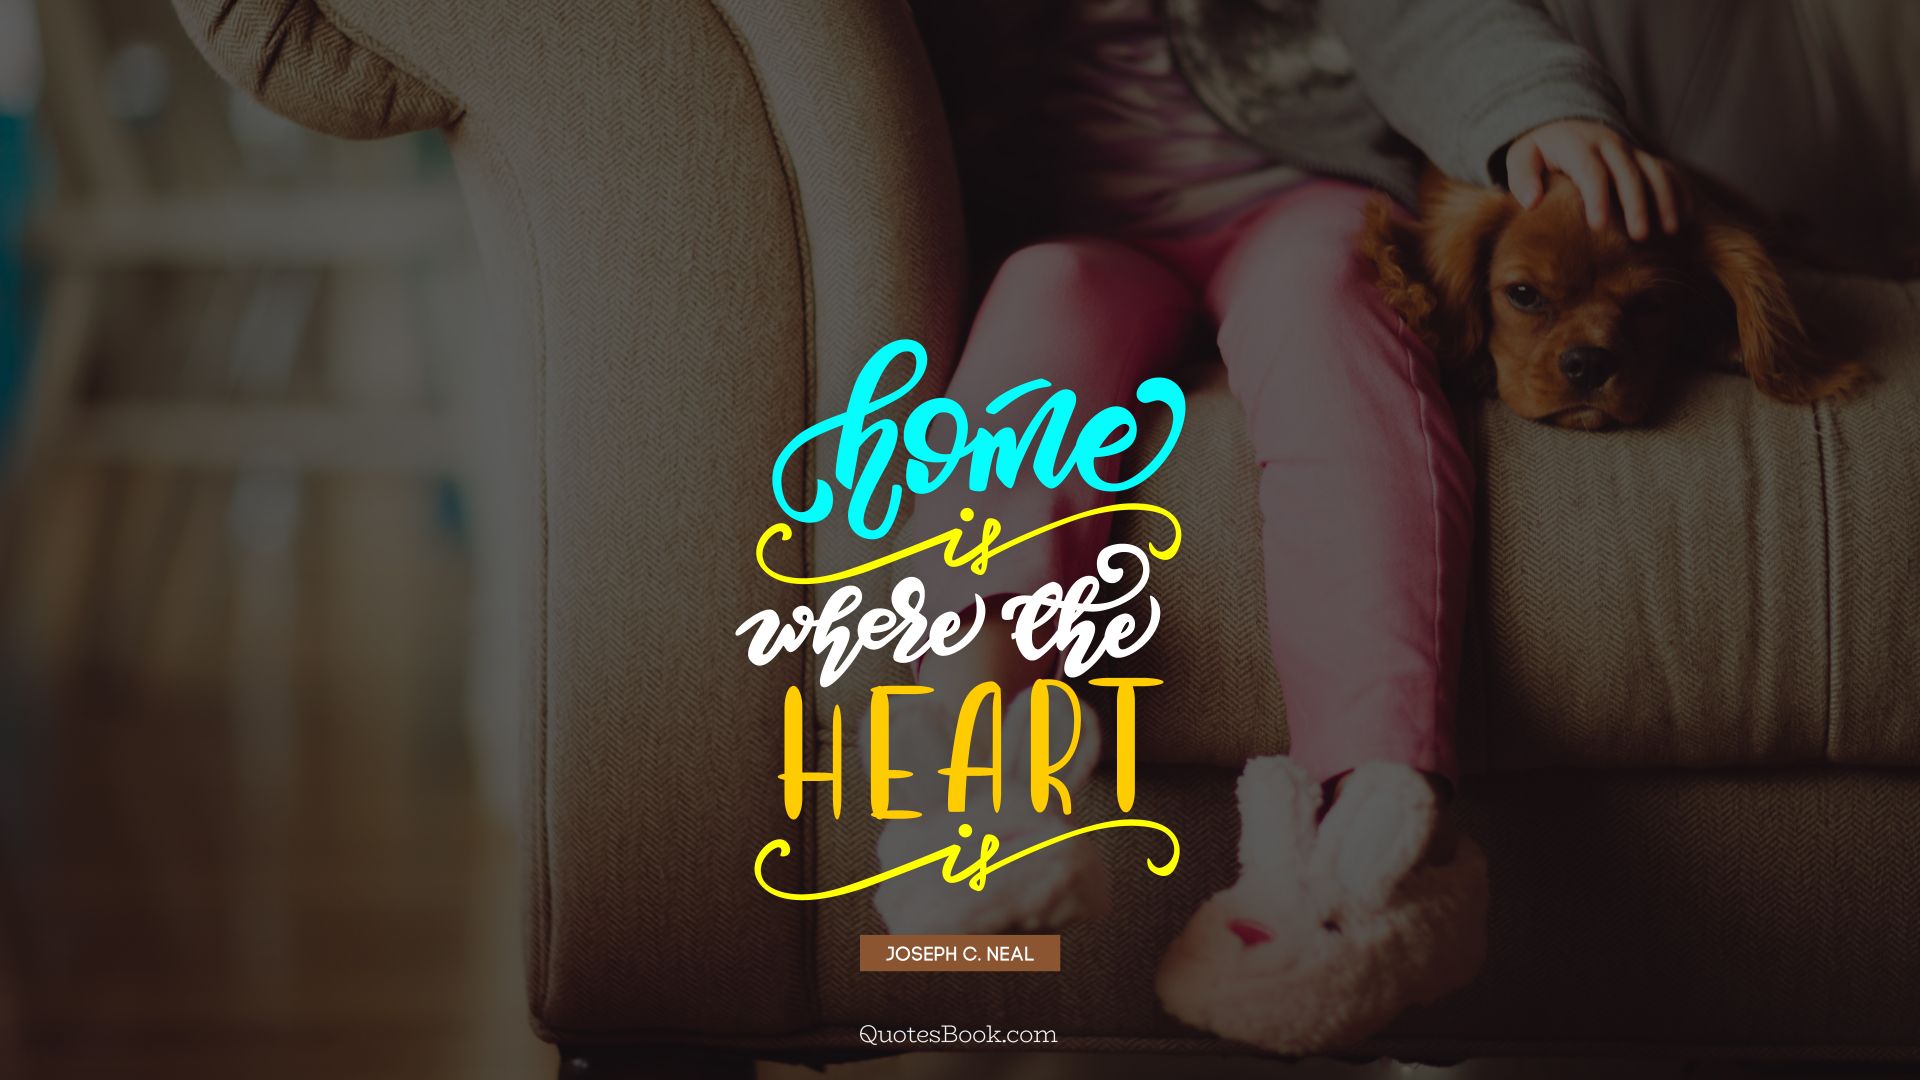 Home is where the heart is. - Quote by Joseph C. Neal